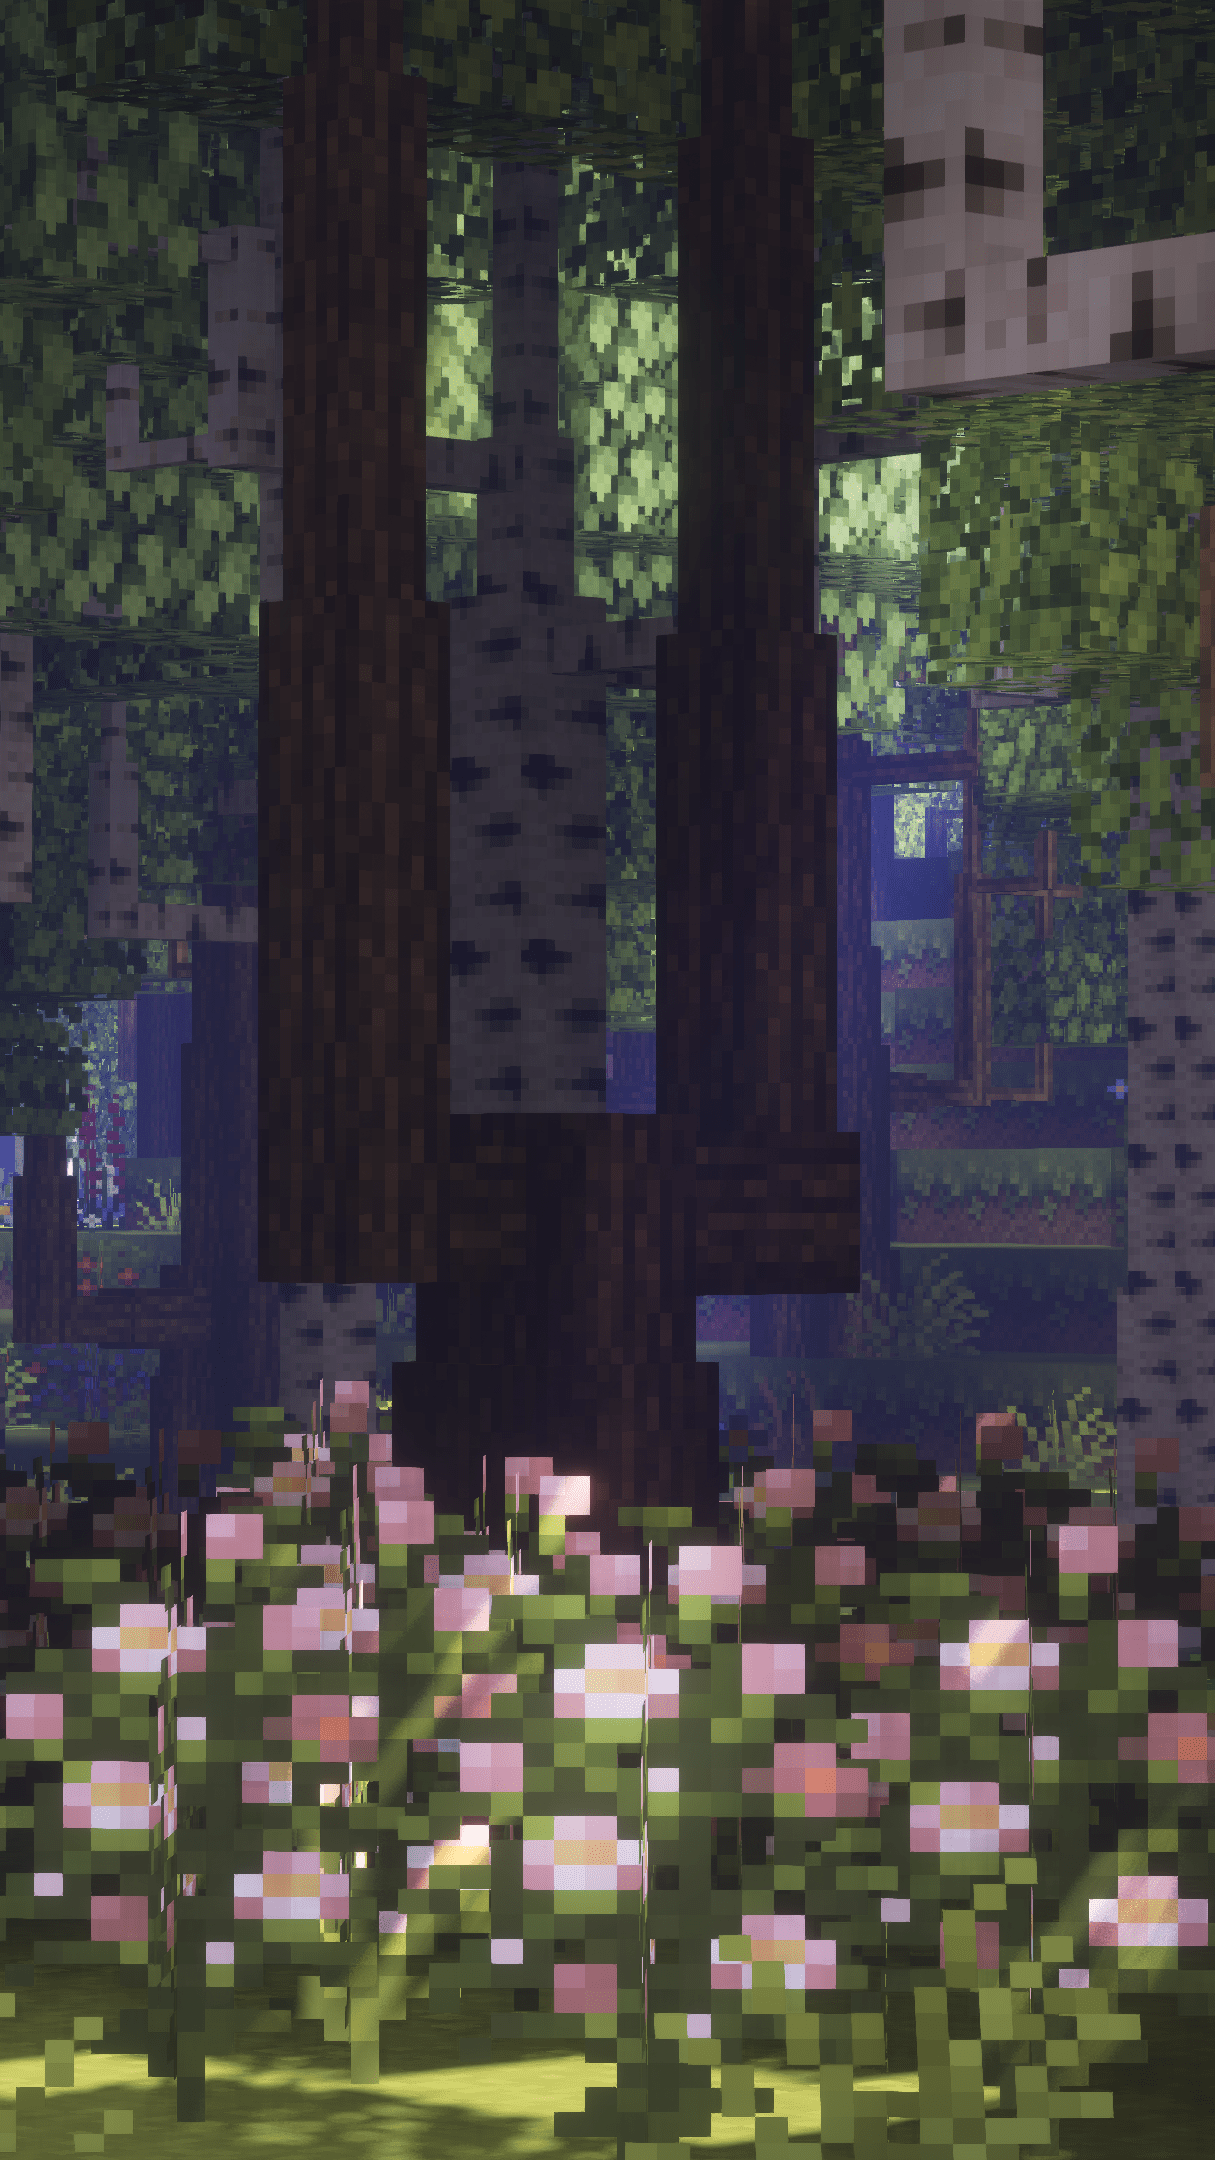 A Minecraft screenshot of a forest with a tree stump in the foreground and a small house in the background. - Minecraft